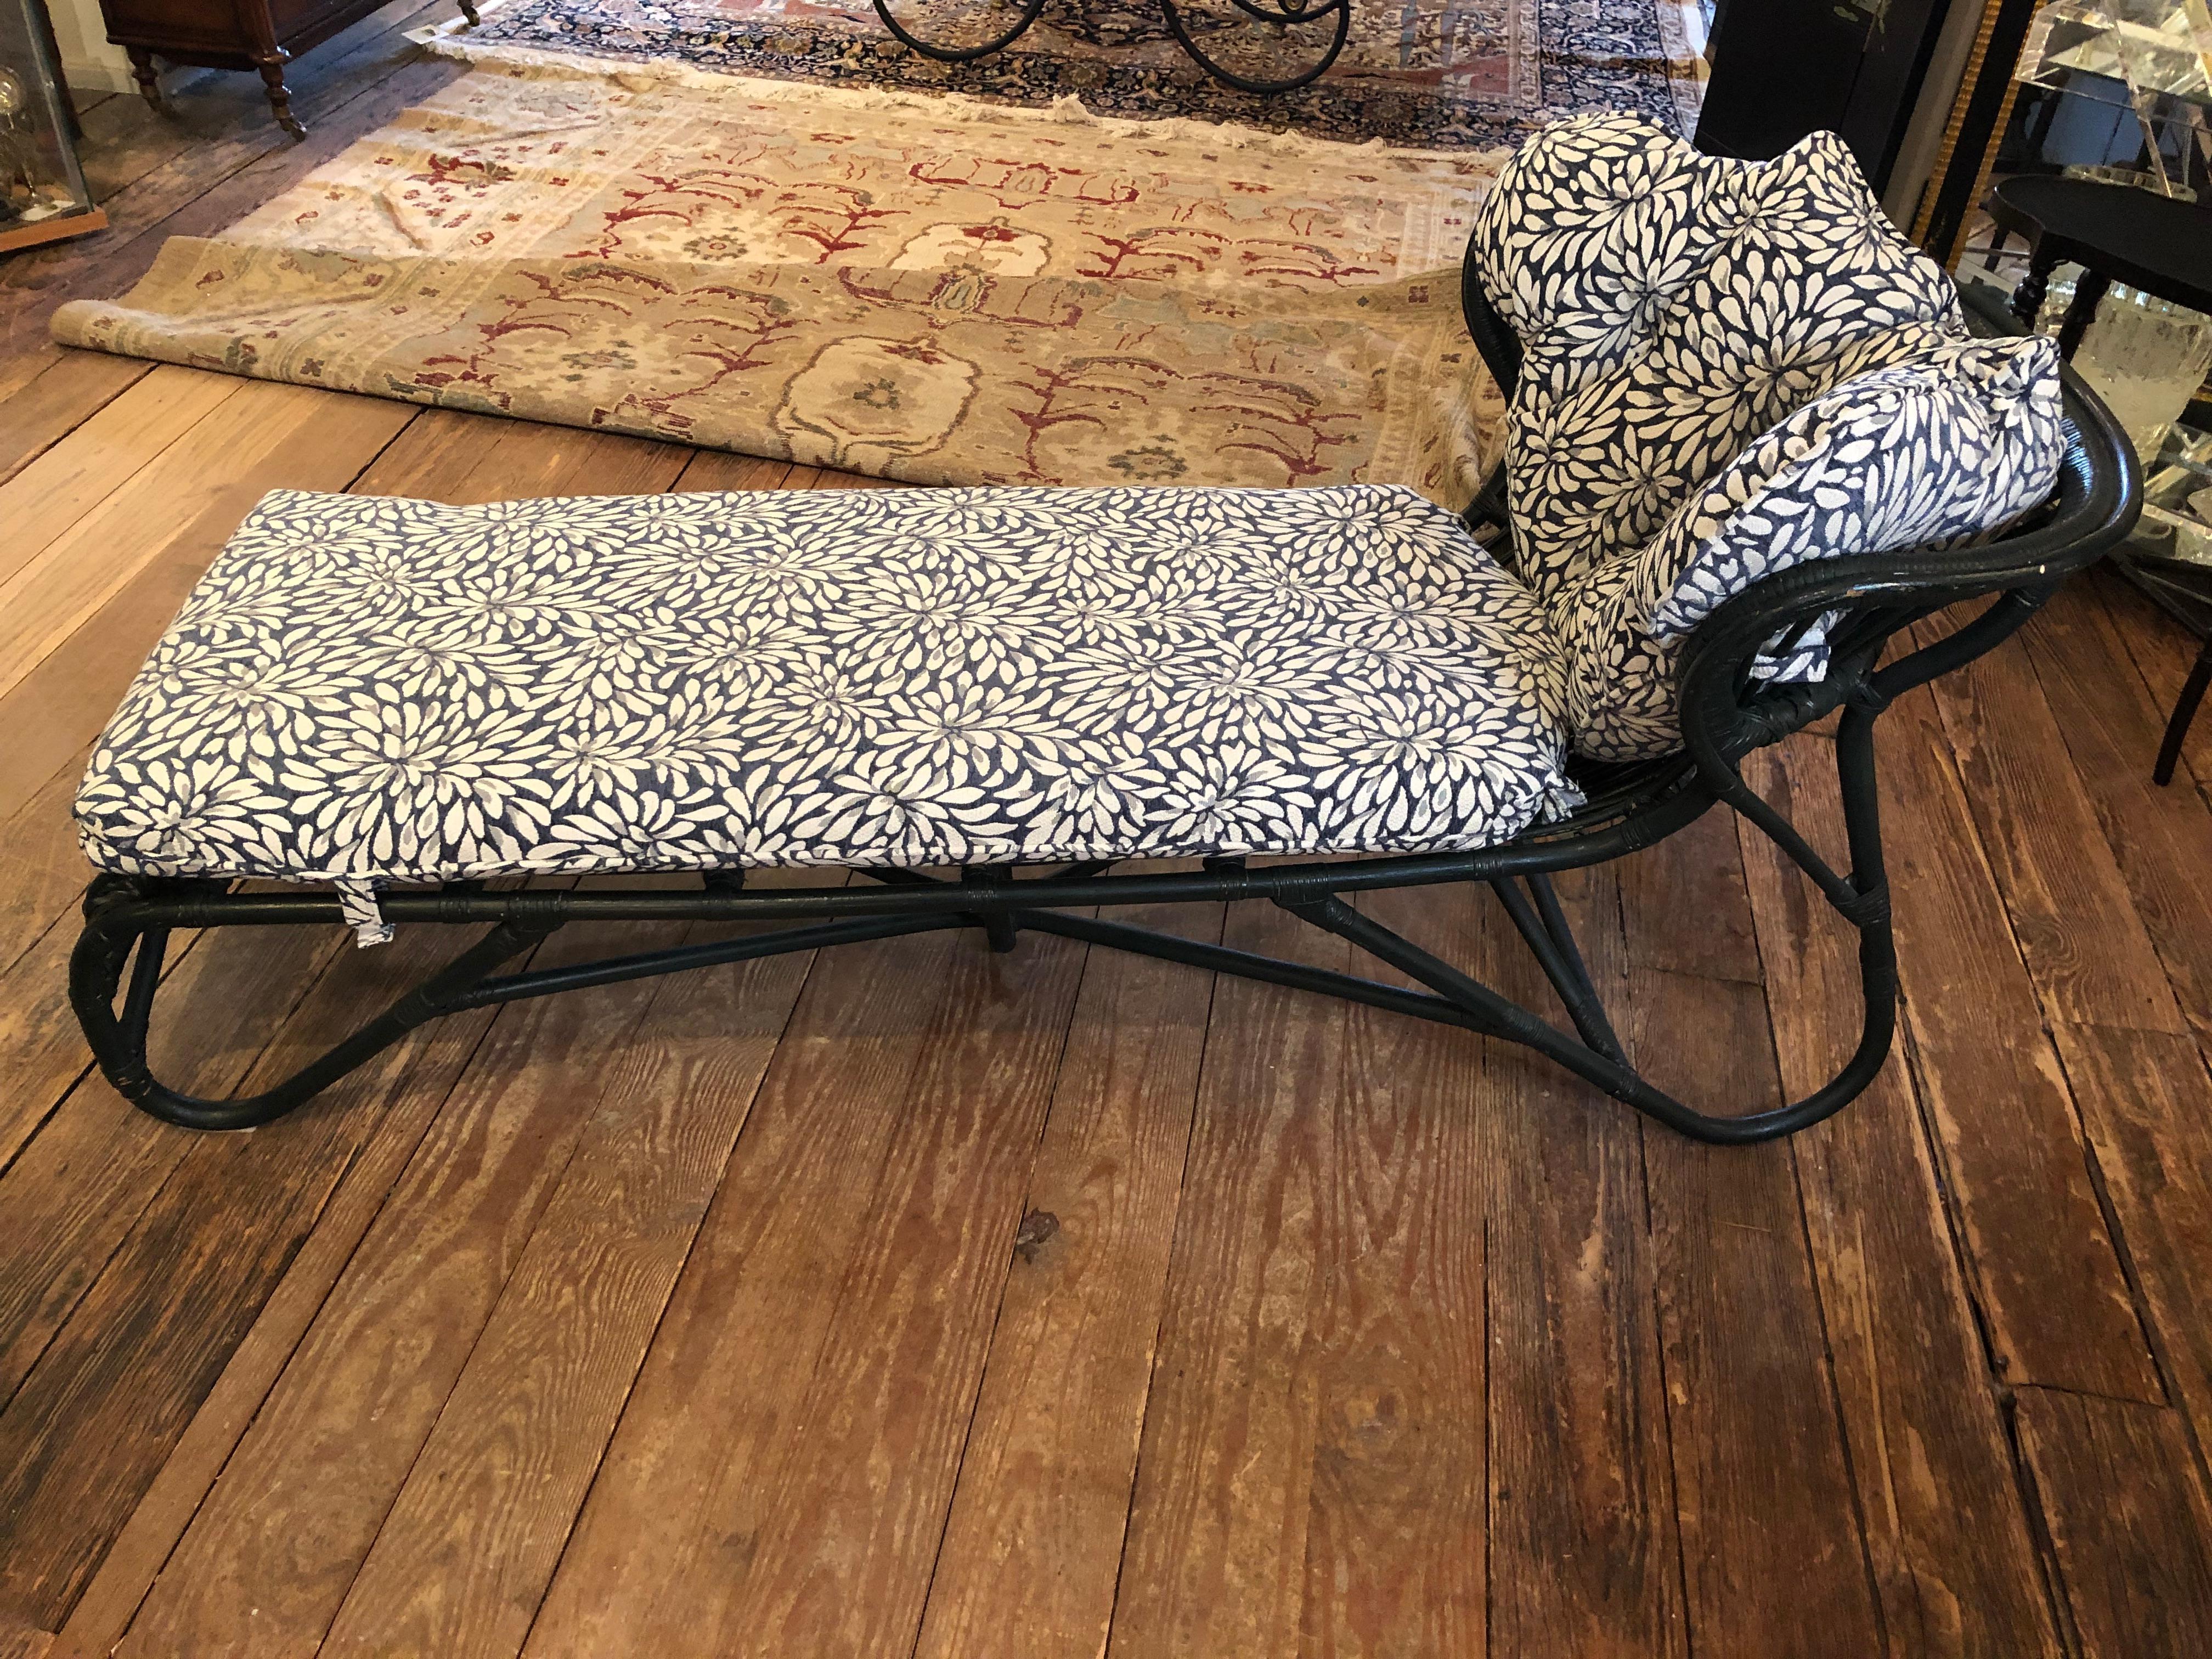 Charming dark green wicker vintage chaise longue with delightful silhouette and brand new custom cushions that velcro in place.  The back cushion is a fabulous tufted clam shape adding a bit of whimsy and rarity.
seat height 15